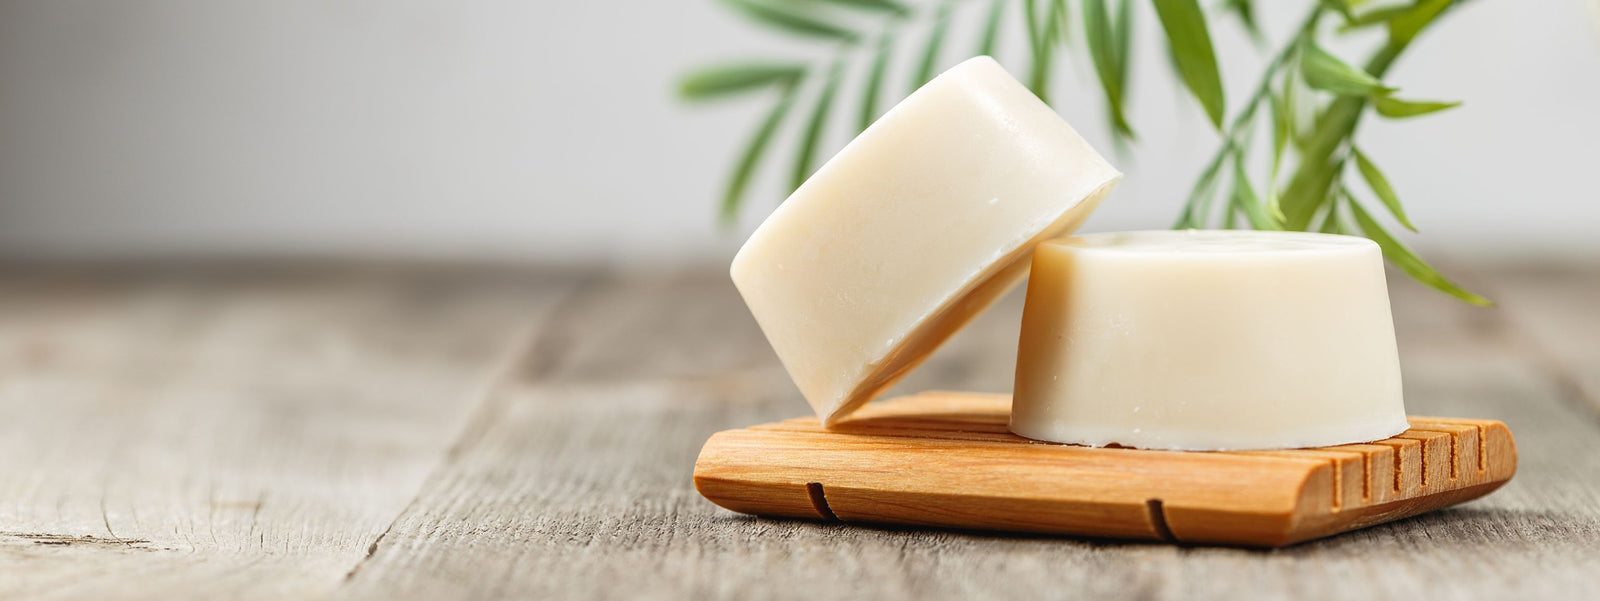 Shampoo Bars: Pros, Cons, and Everything You Need to Know